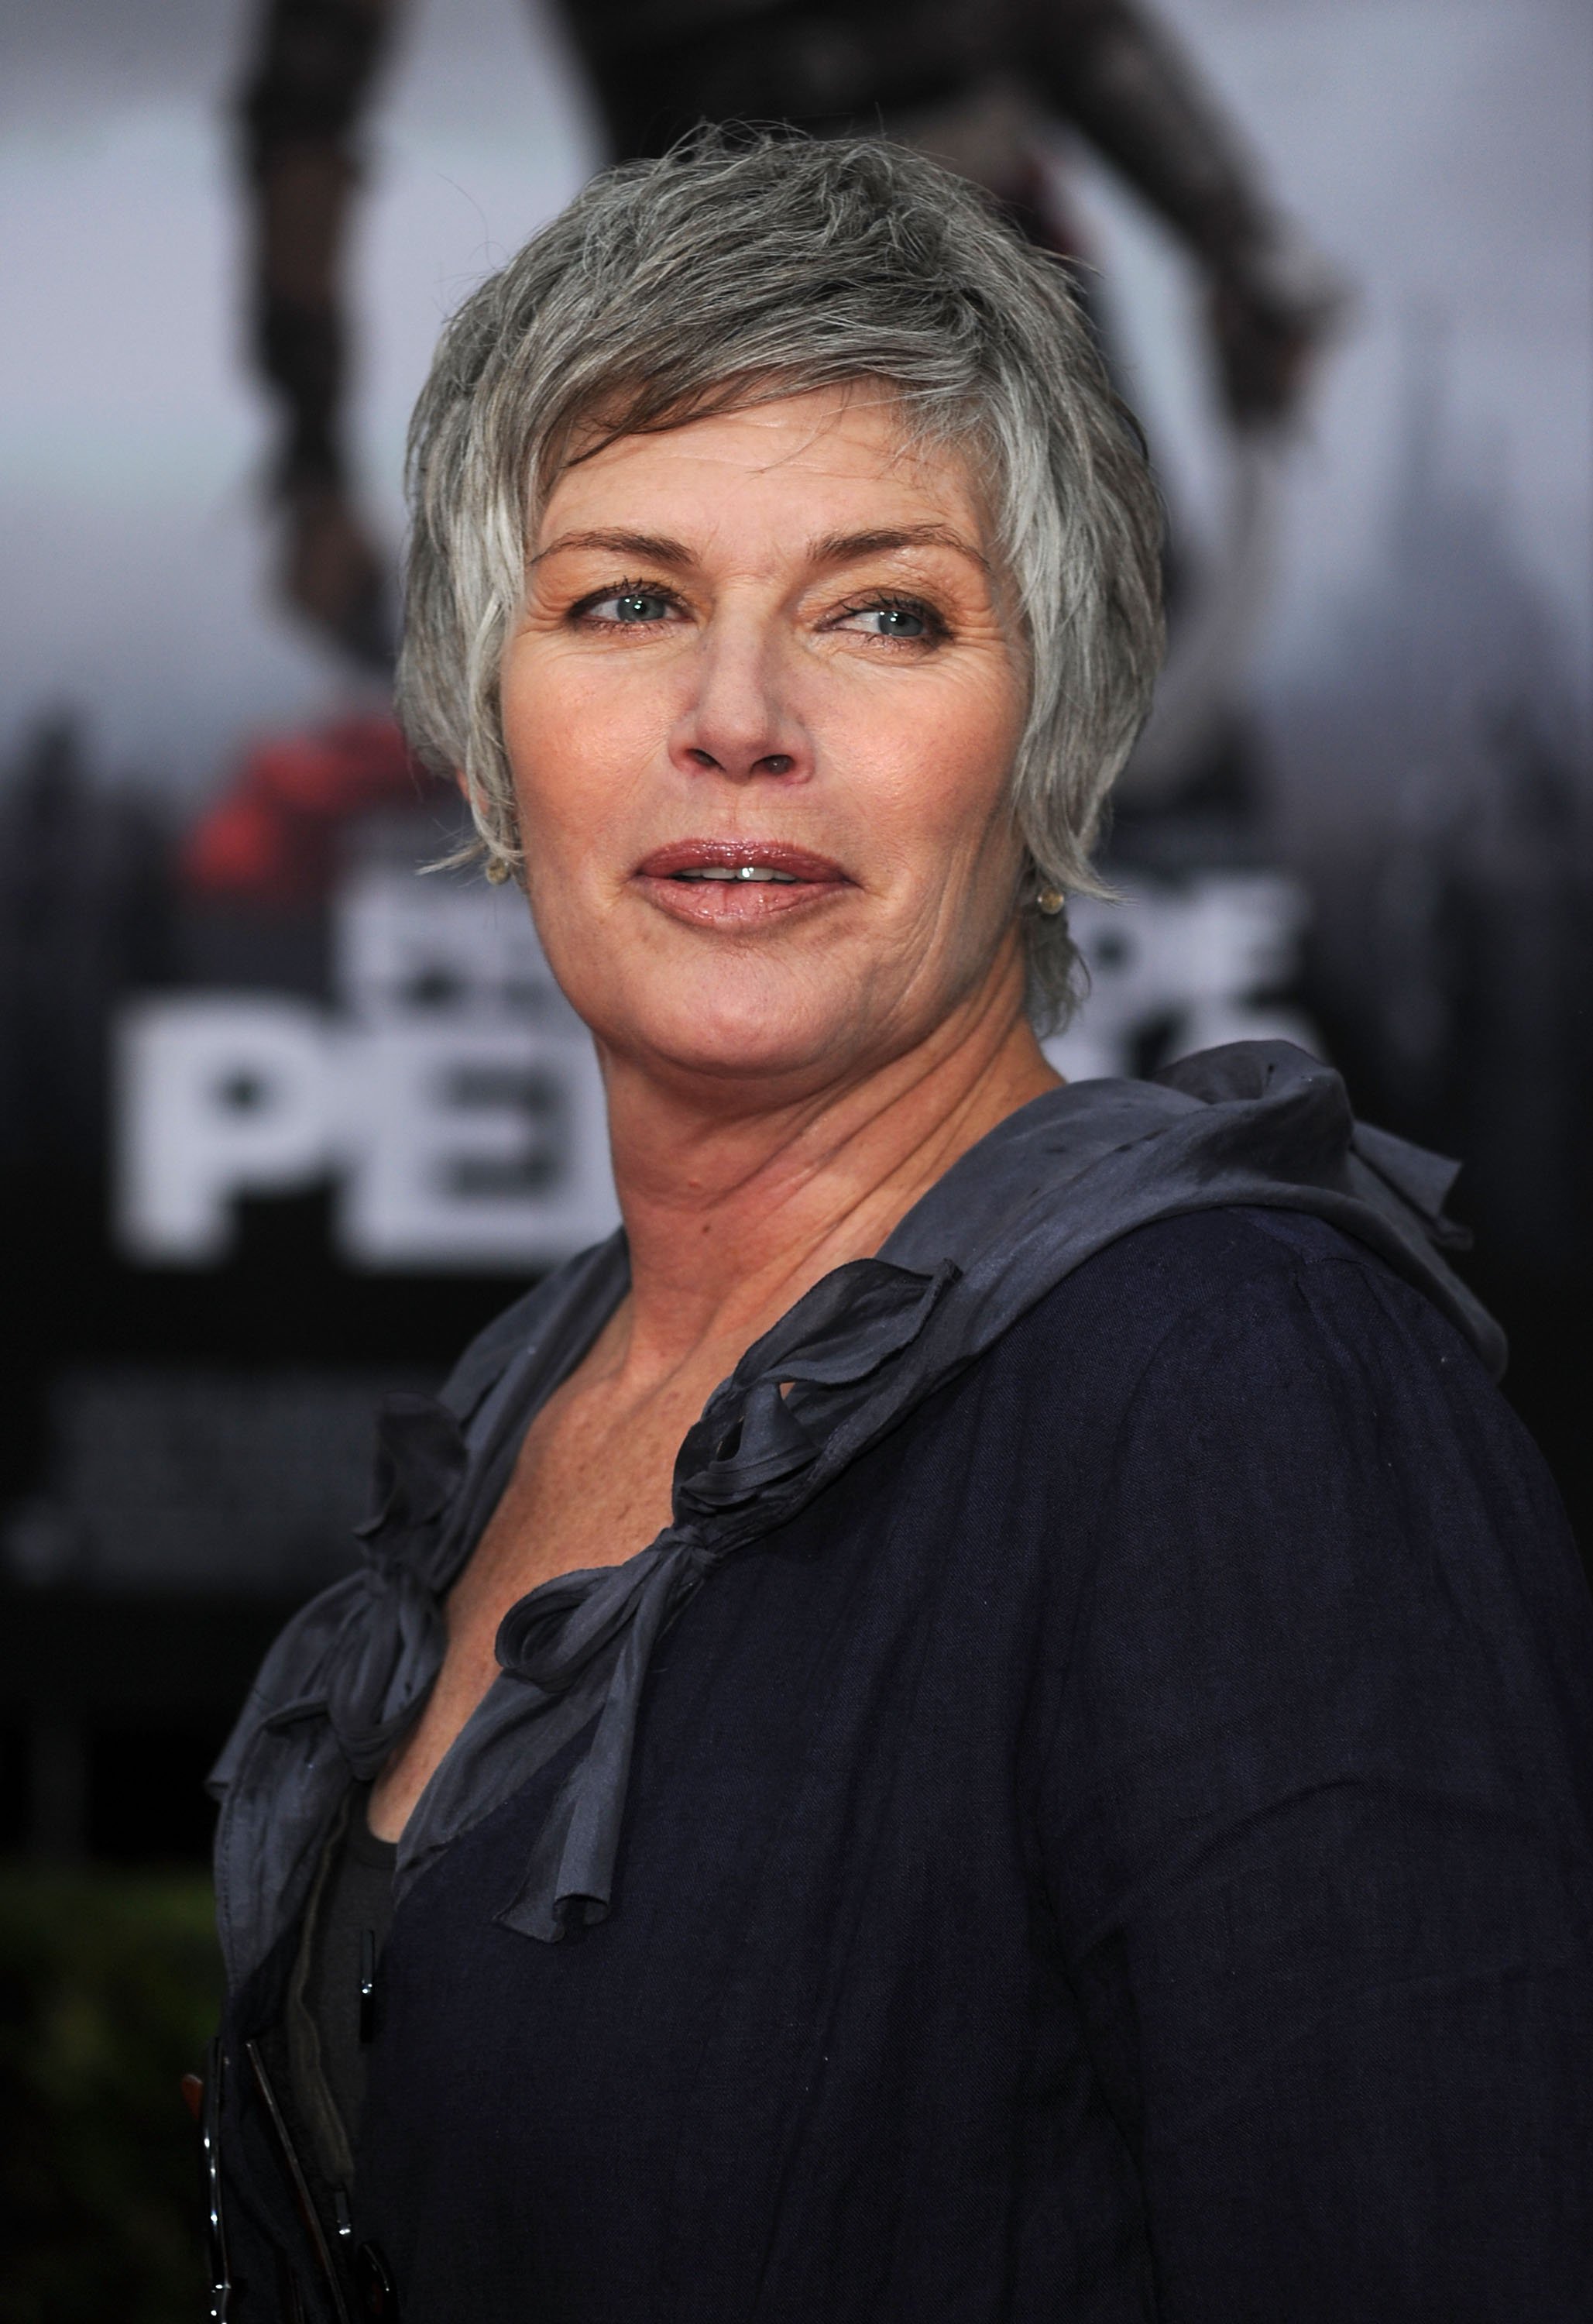 Kelly McGillis at the premiere of Walt Disney Pictures' "Prince Of Persia: The Sands Of Time" held at Grauman''s Chinese Theatre in Hollywood, California | Photo: Frazer Harrison/Getty Images